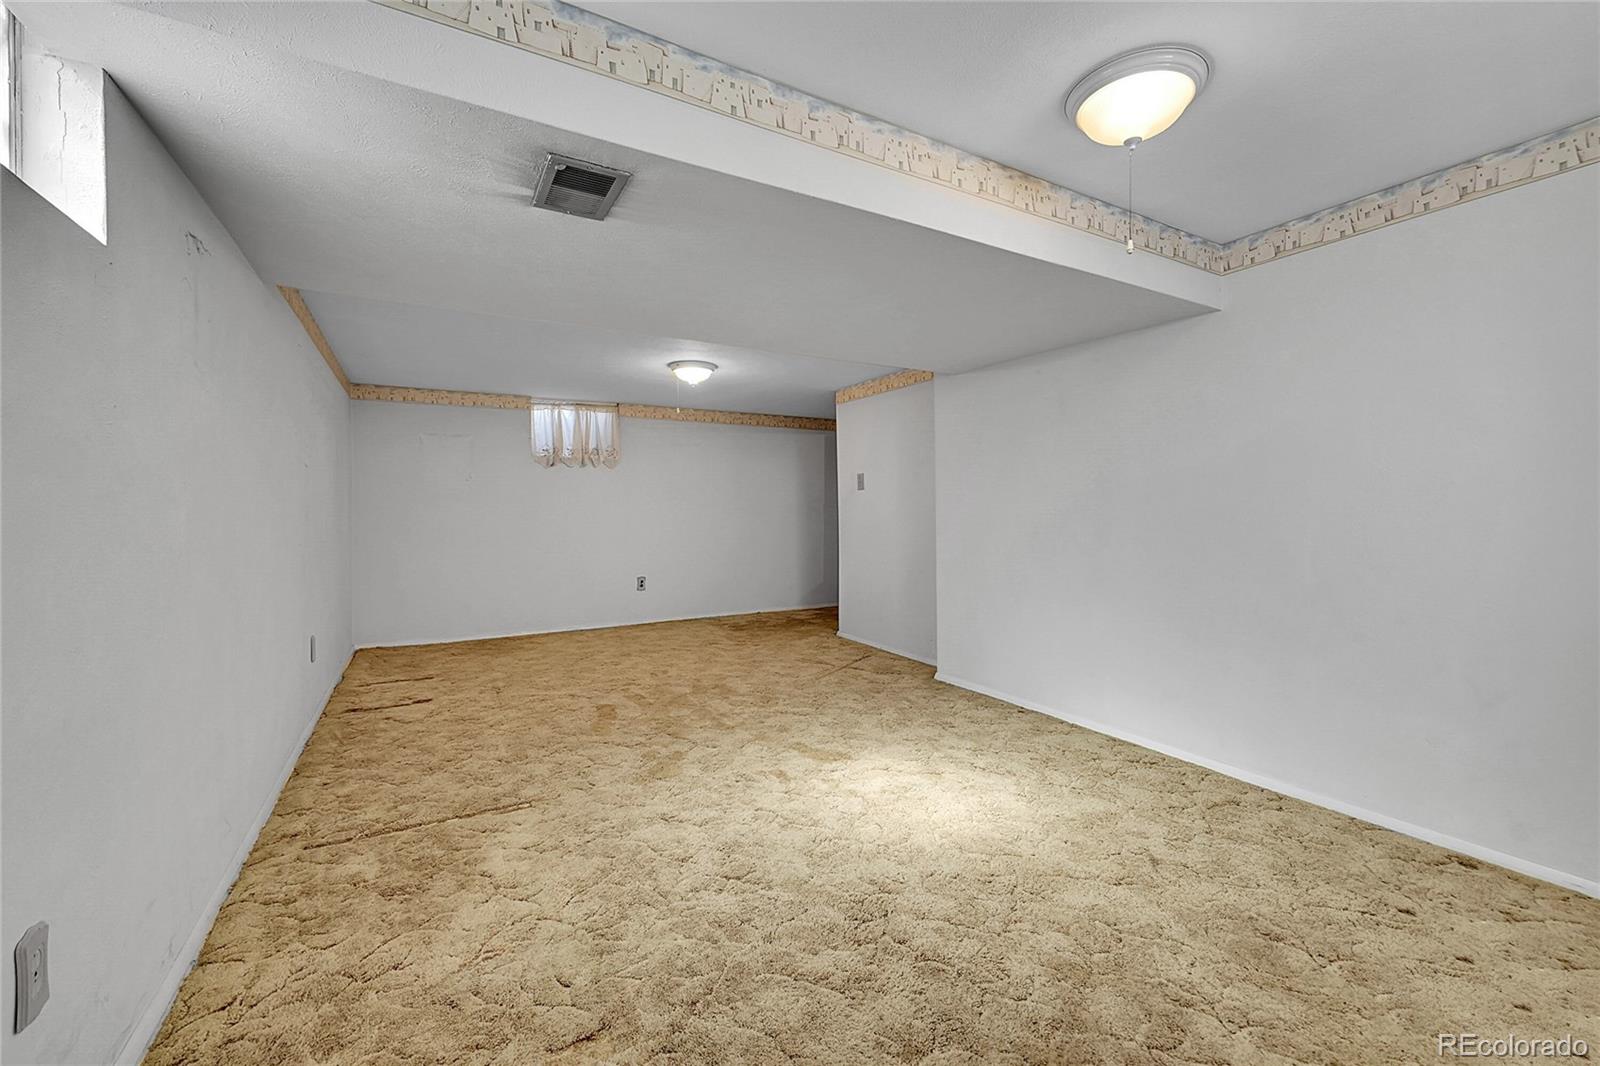 Ample storage area with washer/dryer in basement